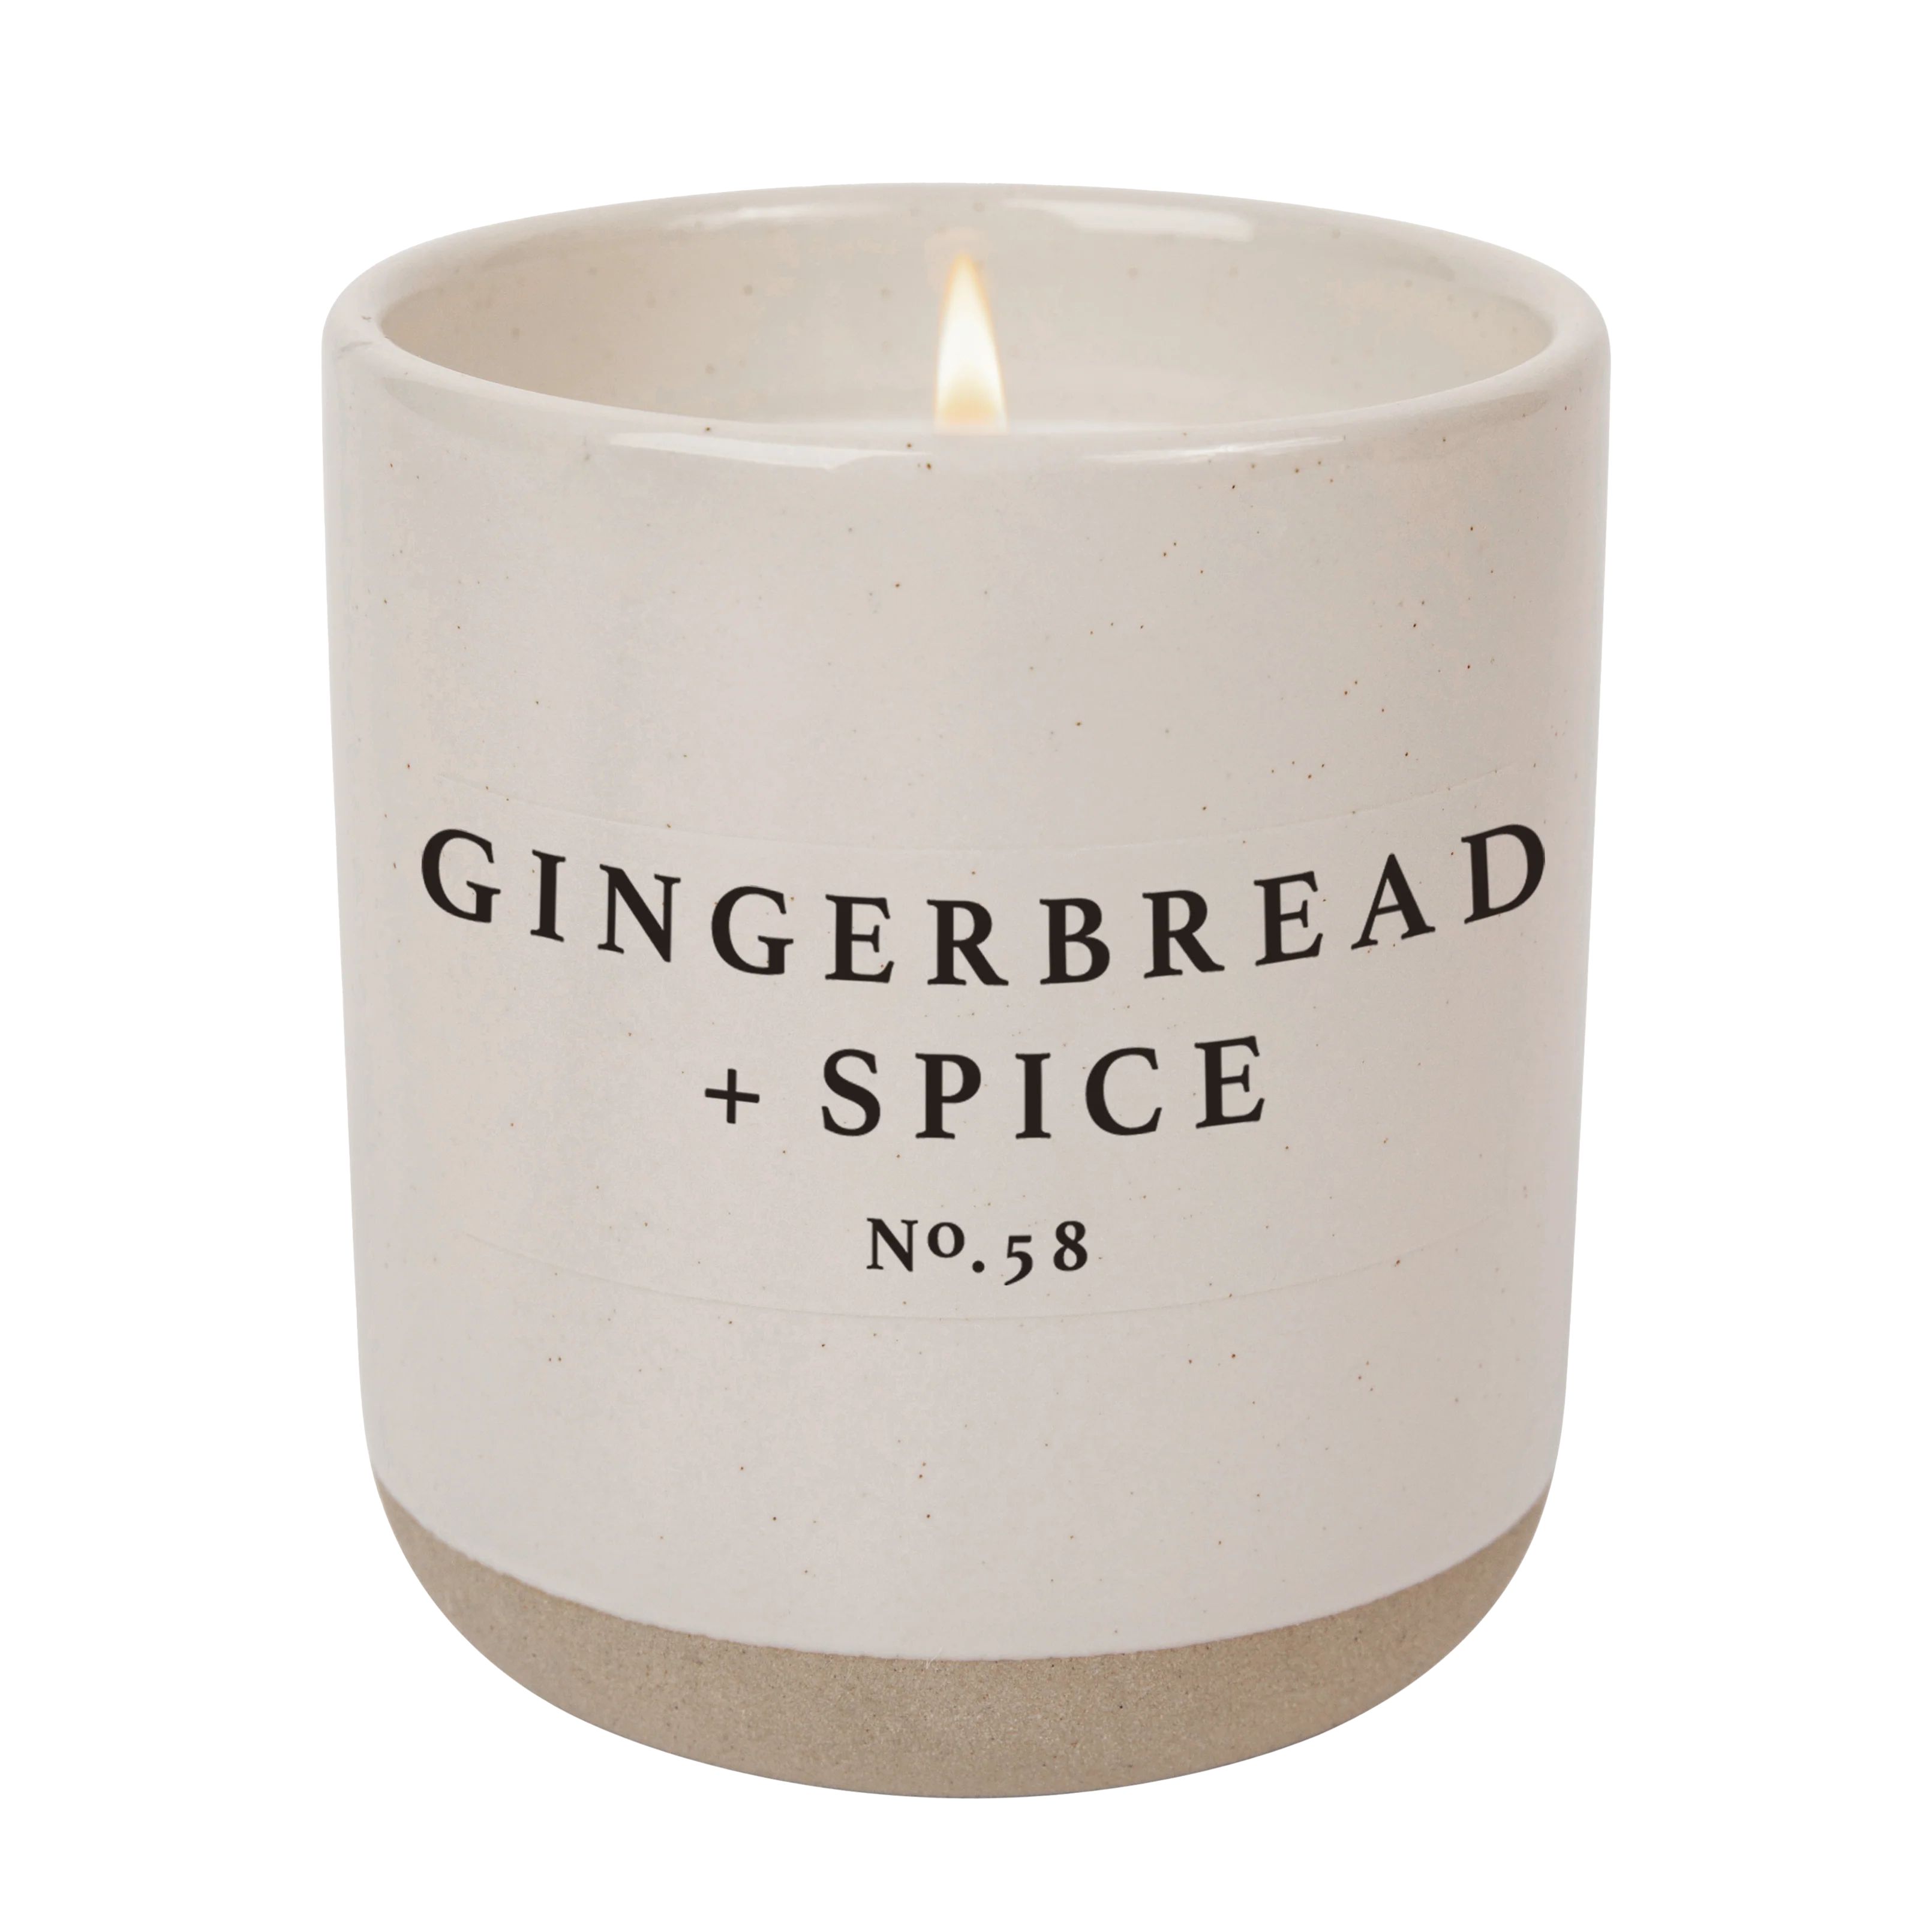 Gingerbread and Spice Soy Candle - Cream Stoneware Jar - 12 oz | Sweet Water Decor, LLC